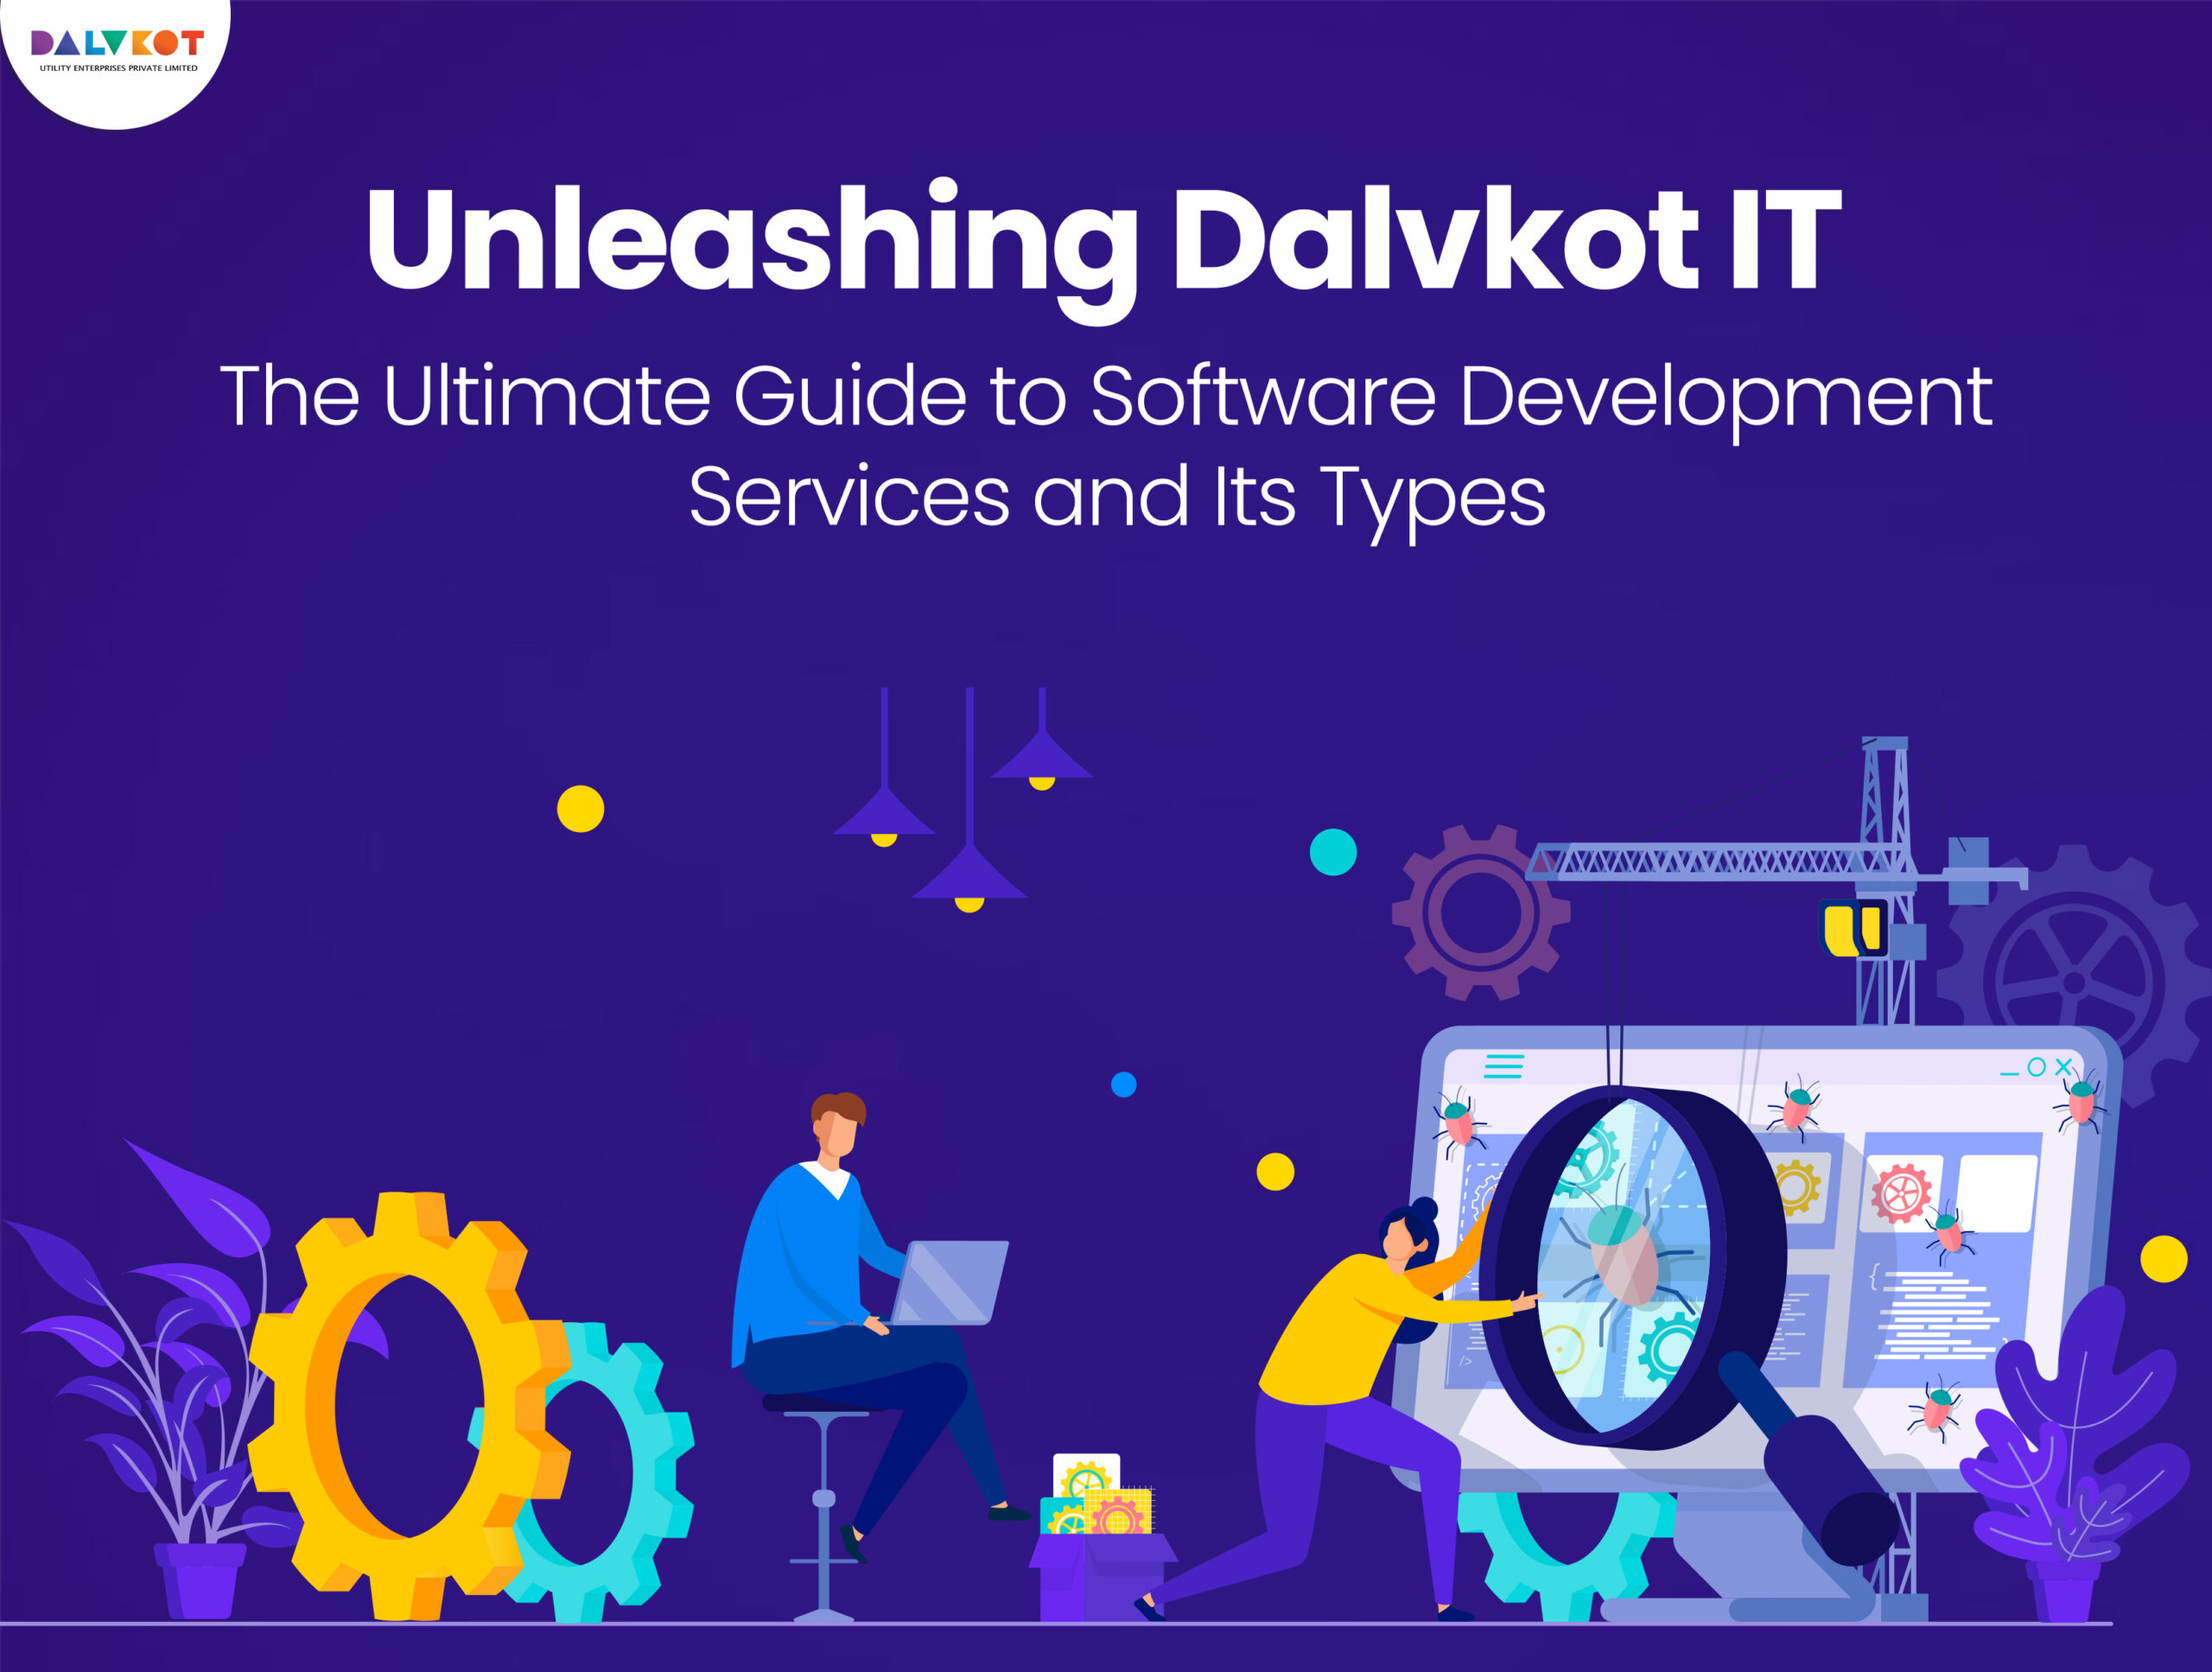 Unleashing Dalvkot IT: The Ultimate Guide to Software Development Services and Its Types